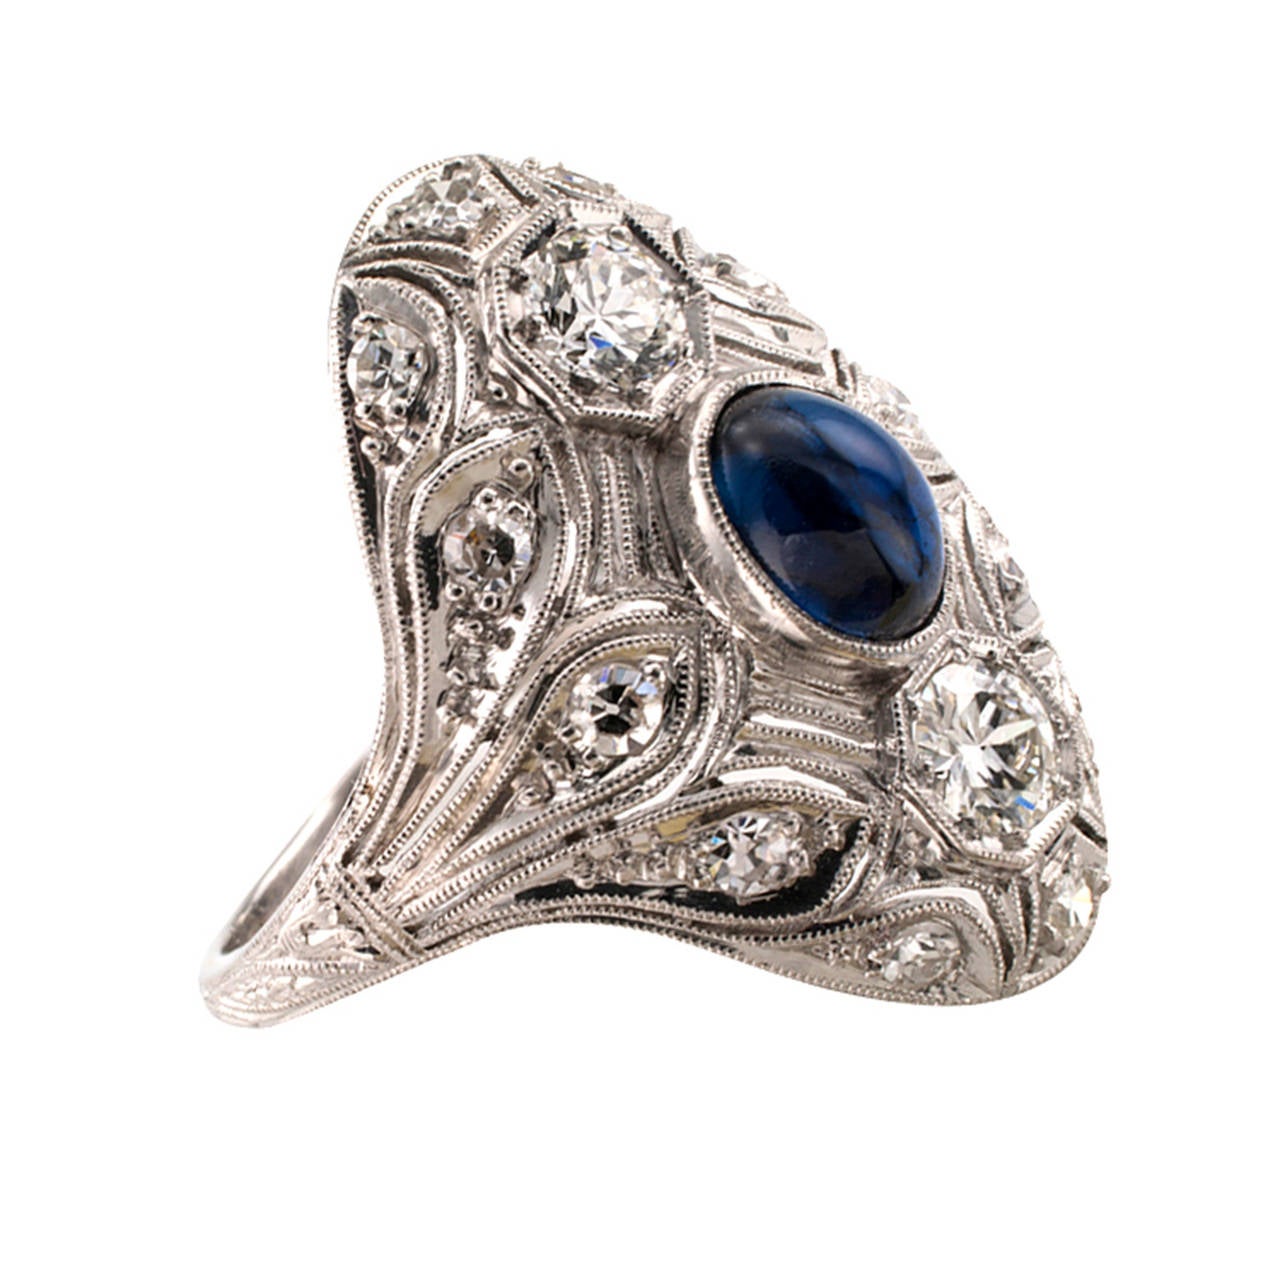 An oval cabochon sapphire bezel set between a pair of old European-cut diamonds set to the-north-and-south are the center of attraction in this beautiful domed Art Deco dinner ring.  Twelve smaller single-cut diamonds add extra sparkle too, nestled